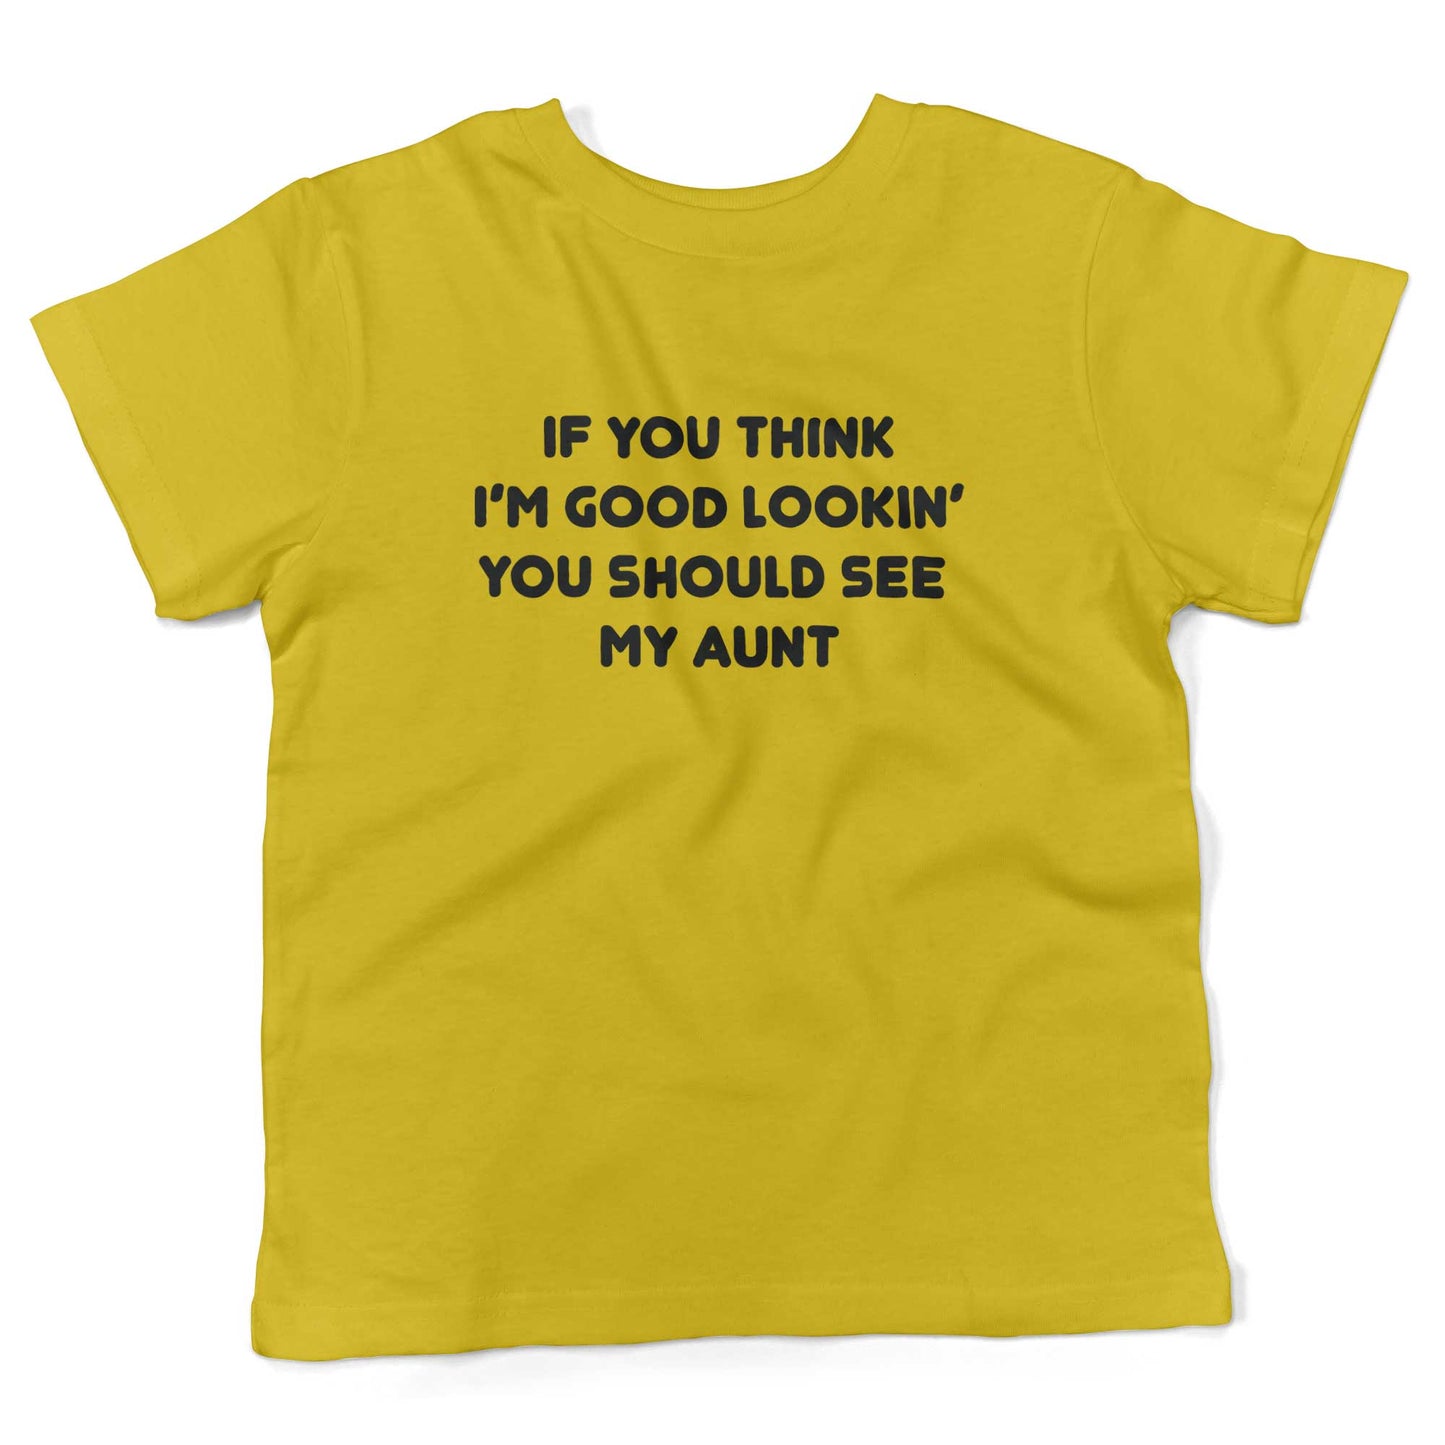 If You Think I'm Good Lookin' You Should See My Aunt Toddler Shirt-Sunshine Yellow-2T